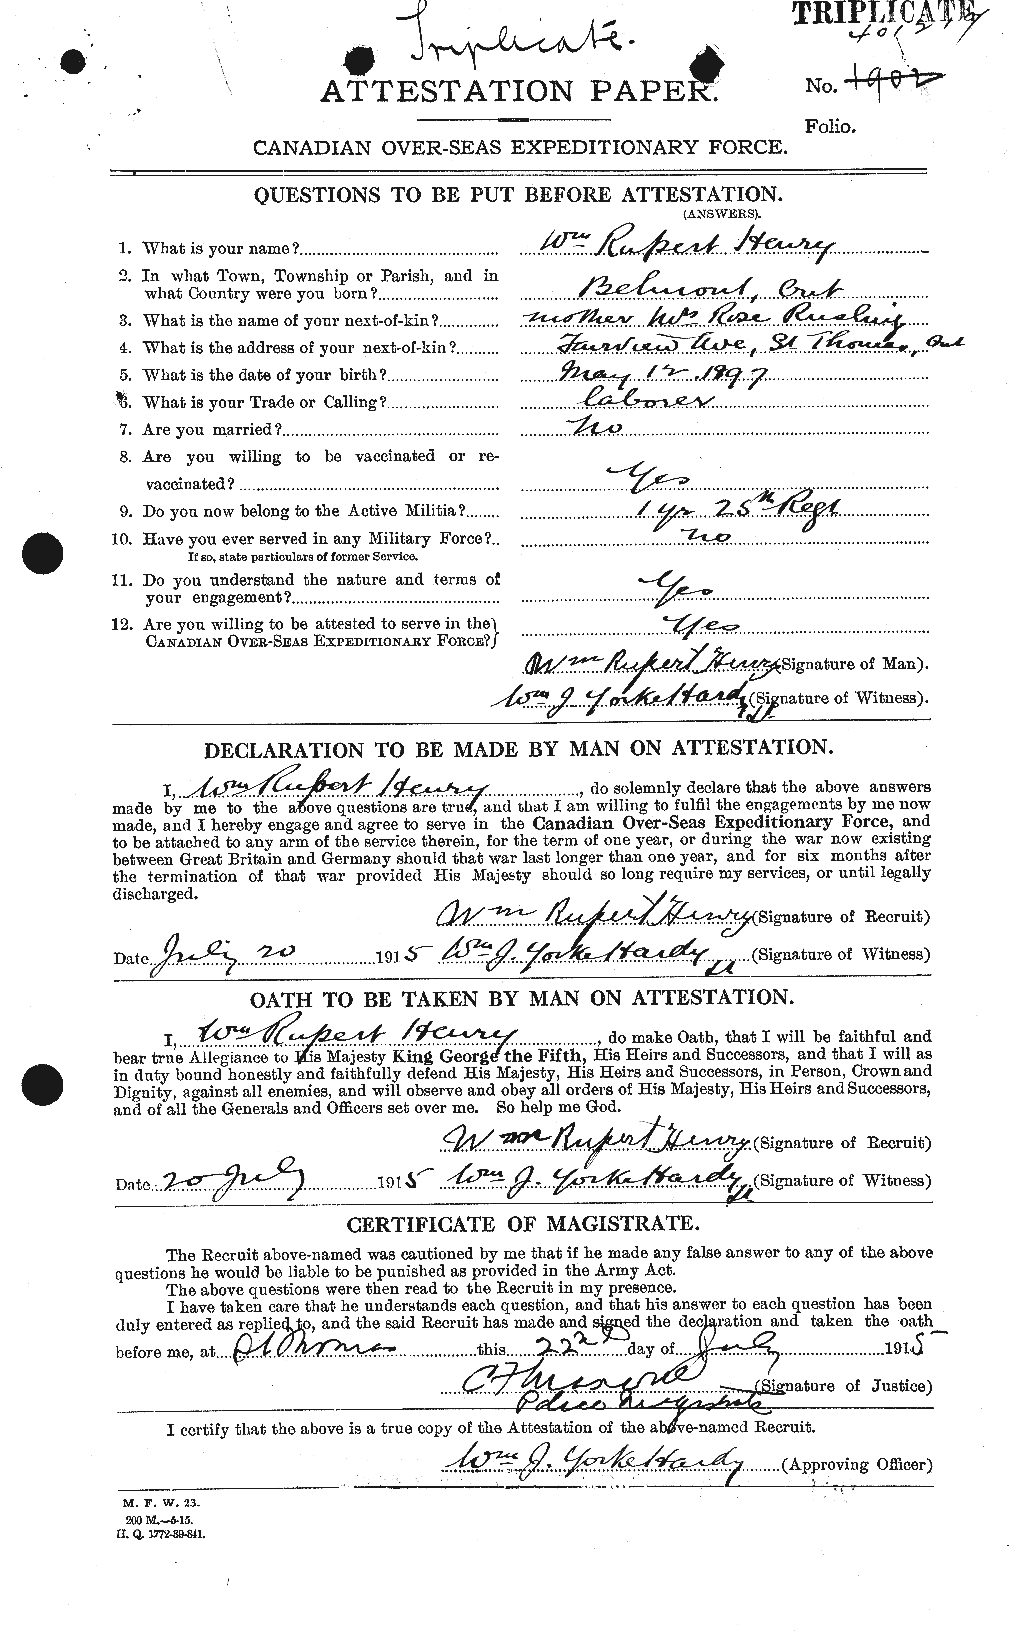 Personnel Records of the First World War - CEF 387798a